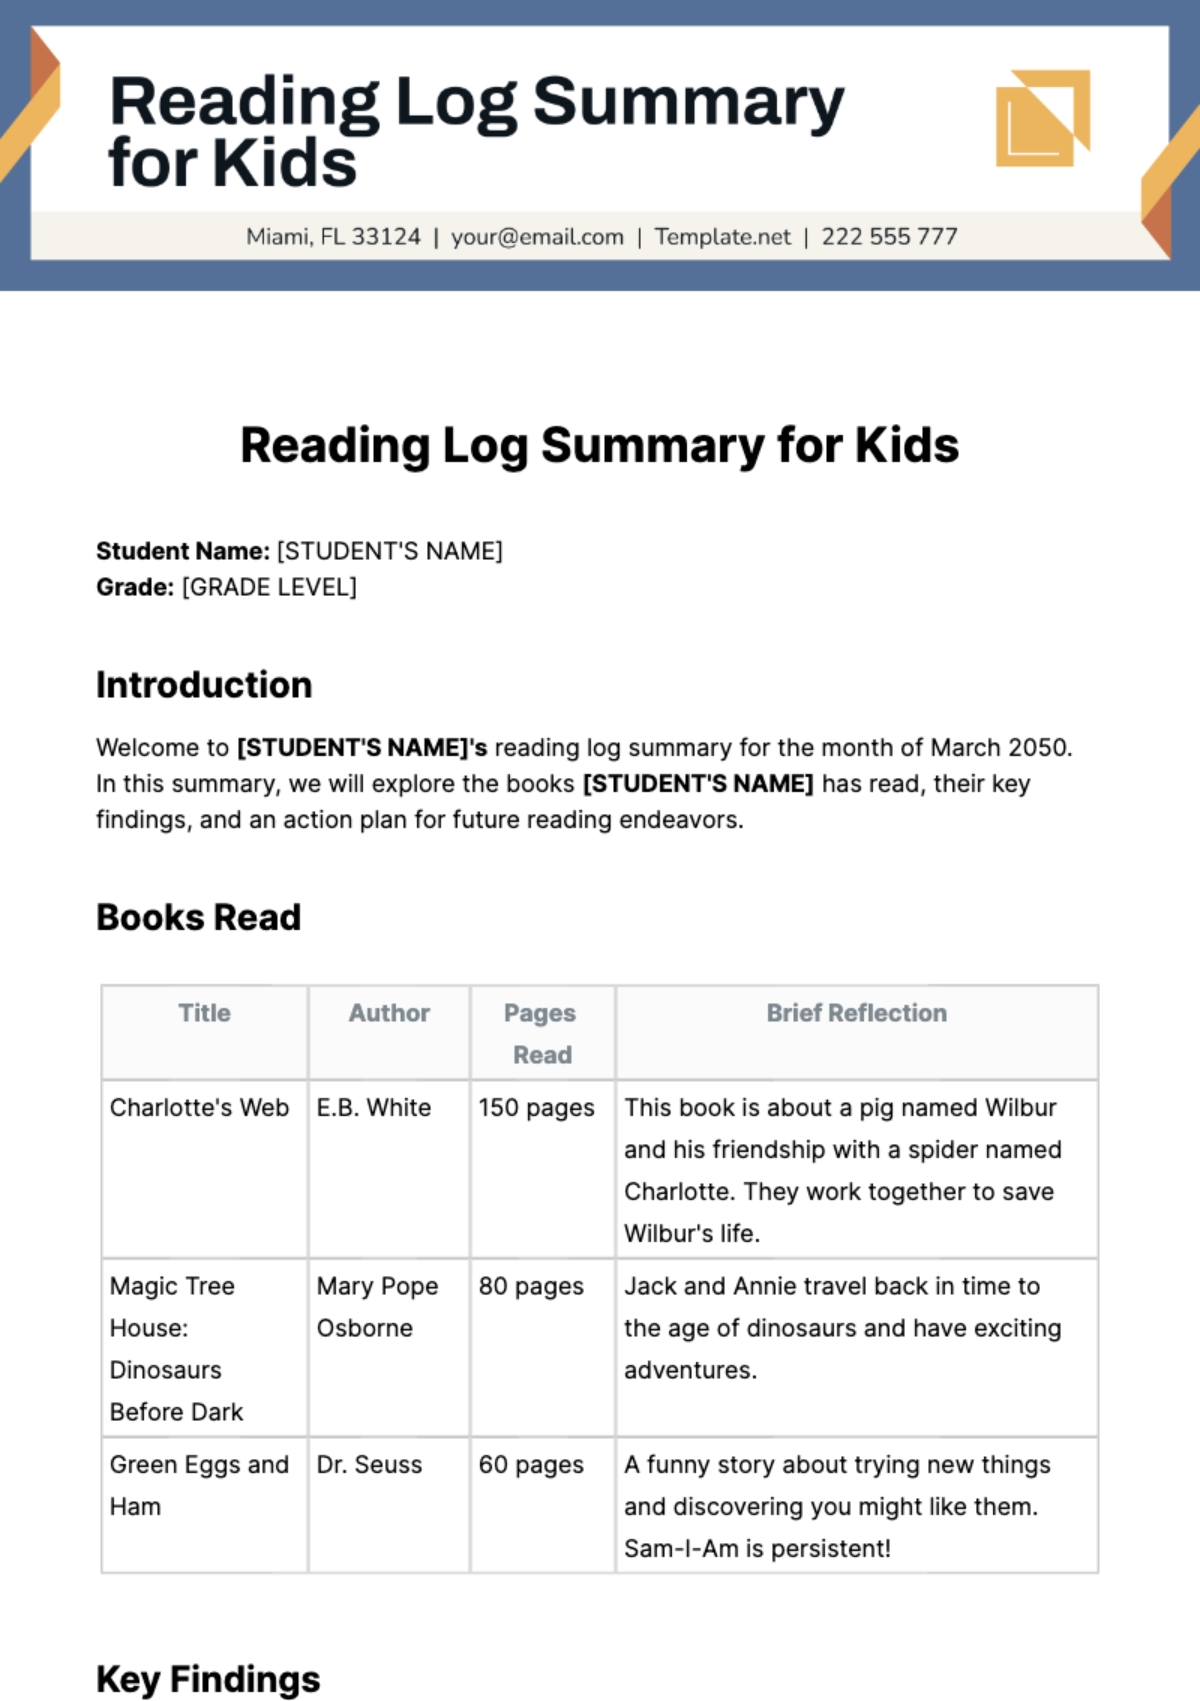 Free Reading Log Summary for Kids Template